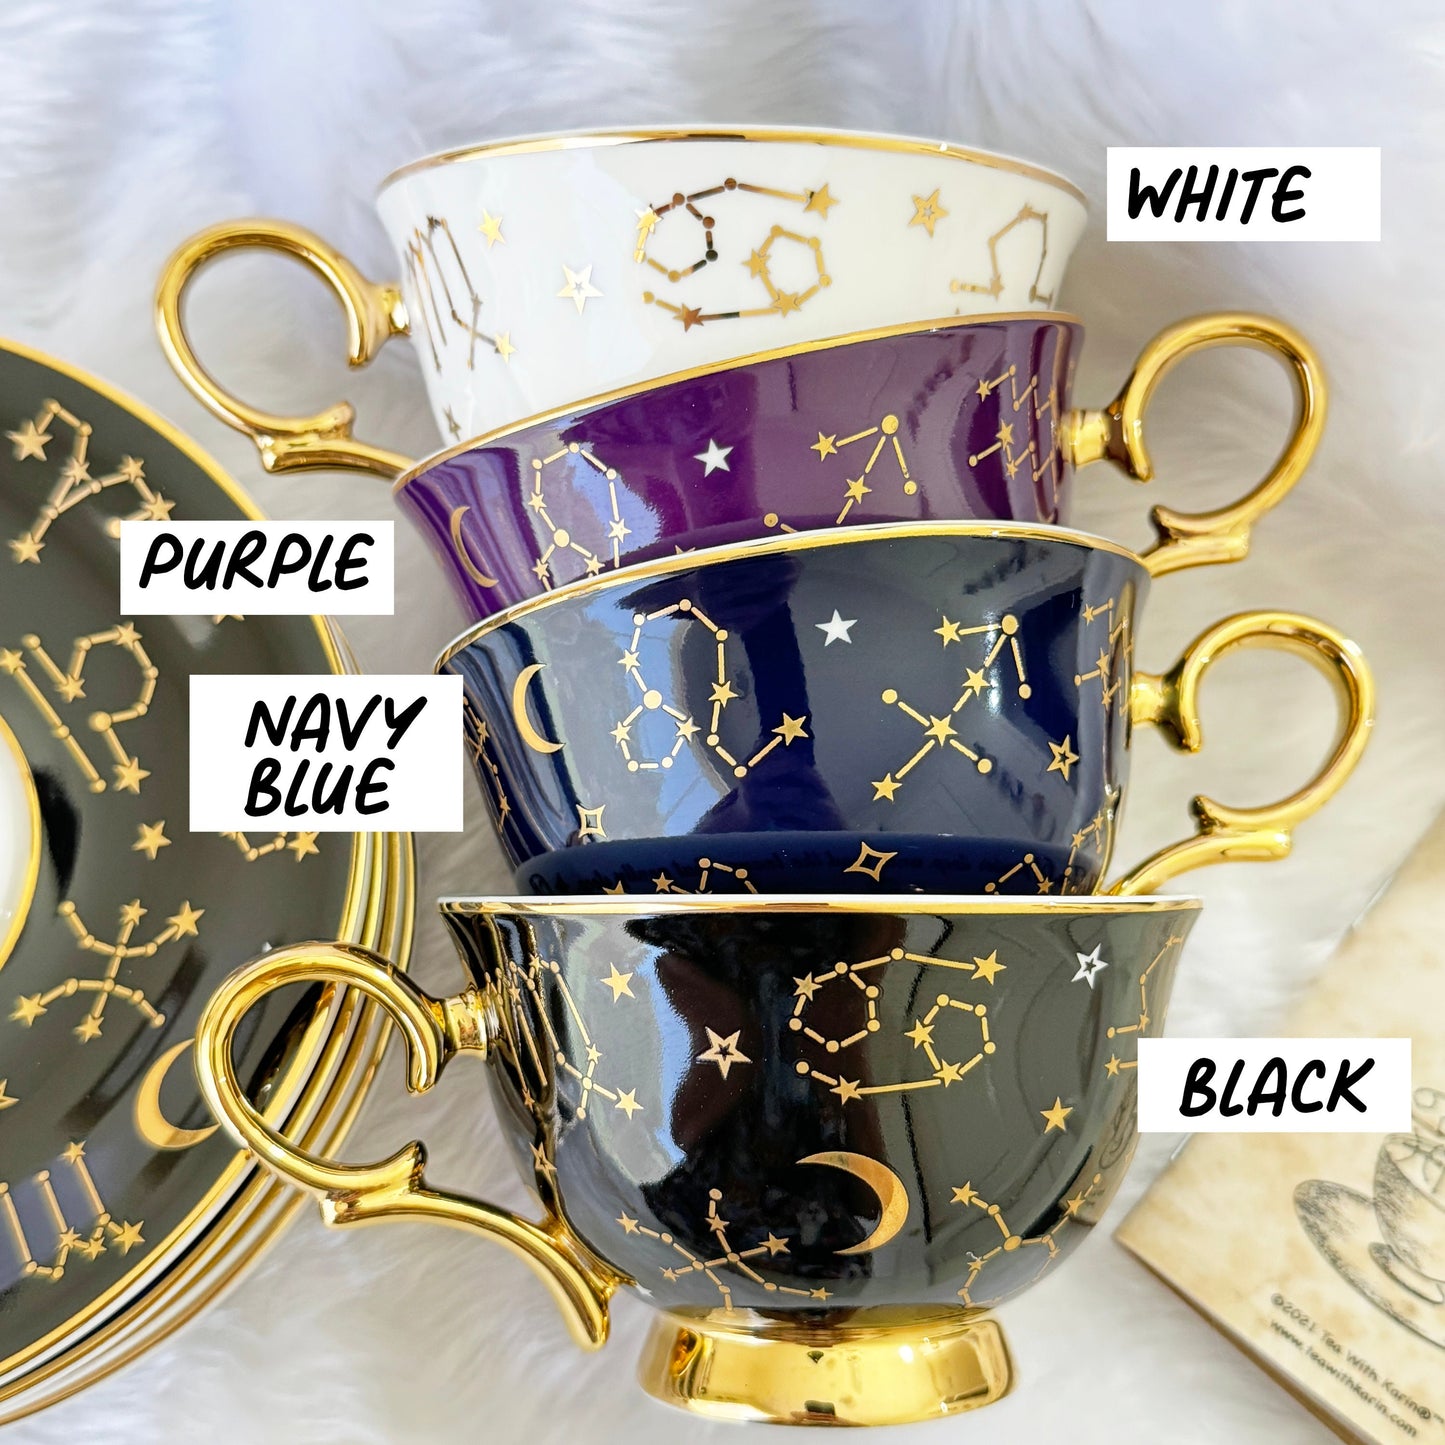 Cups, Custom cups, Customized cup, Witchy, Custom cup gift, Witchy Gifts, Divination, Witchy decor, Teacup, Divination tools, Tea cup, Teacups, Tea set, Gift tea set